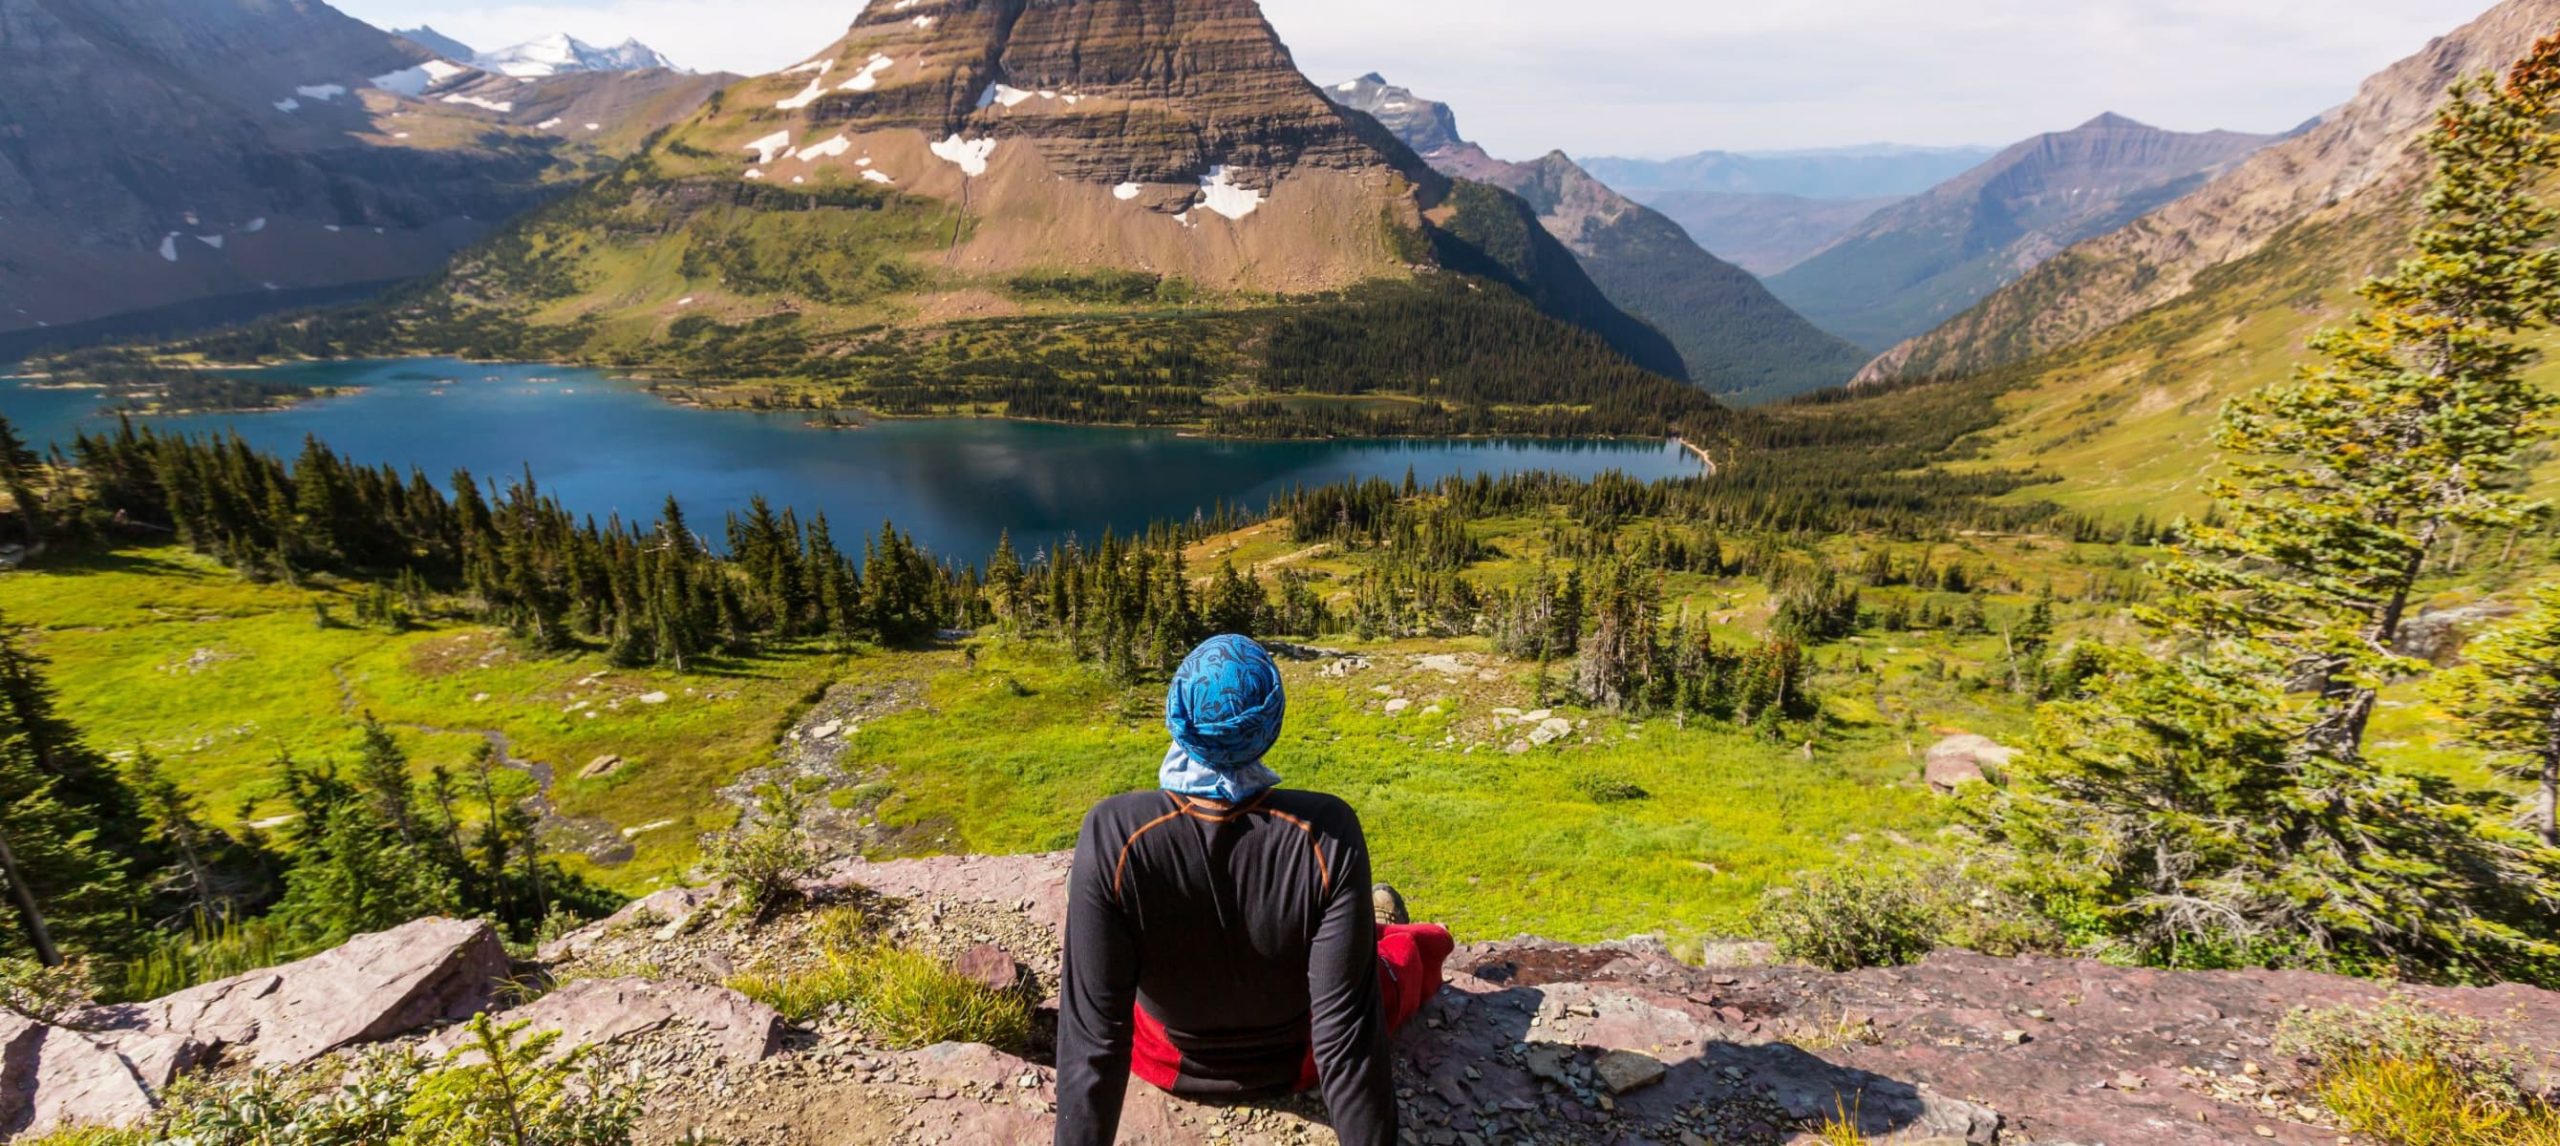 First-Timer’s Guide To Glacier National Park, Montana